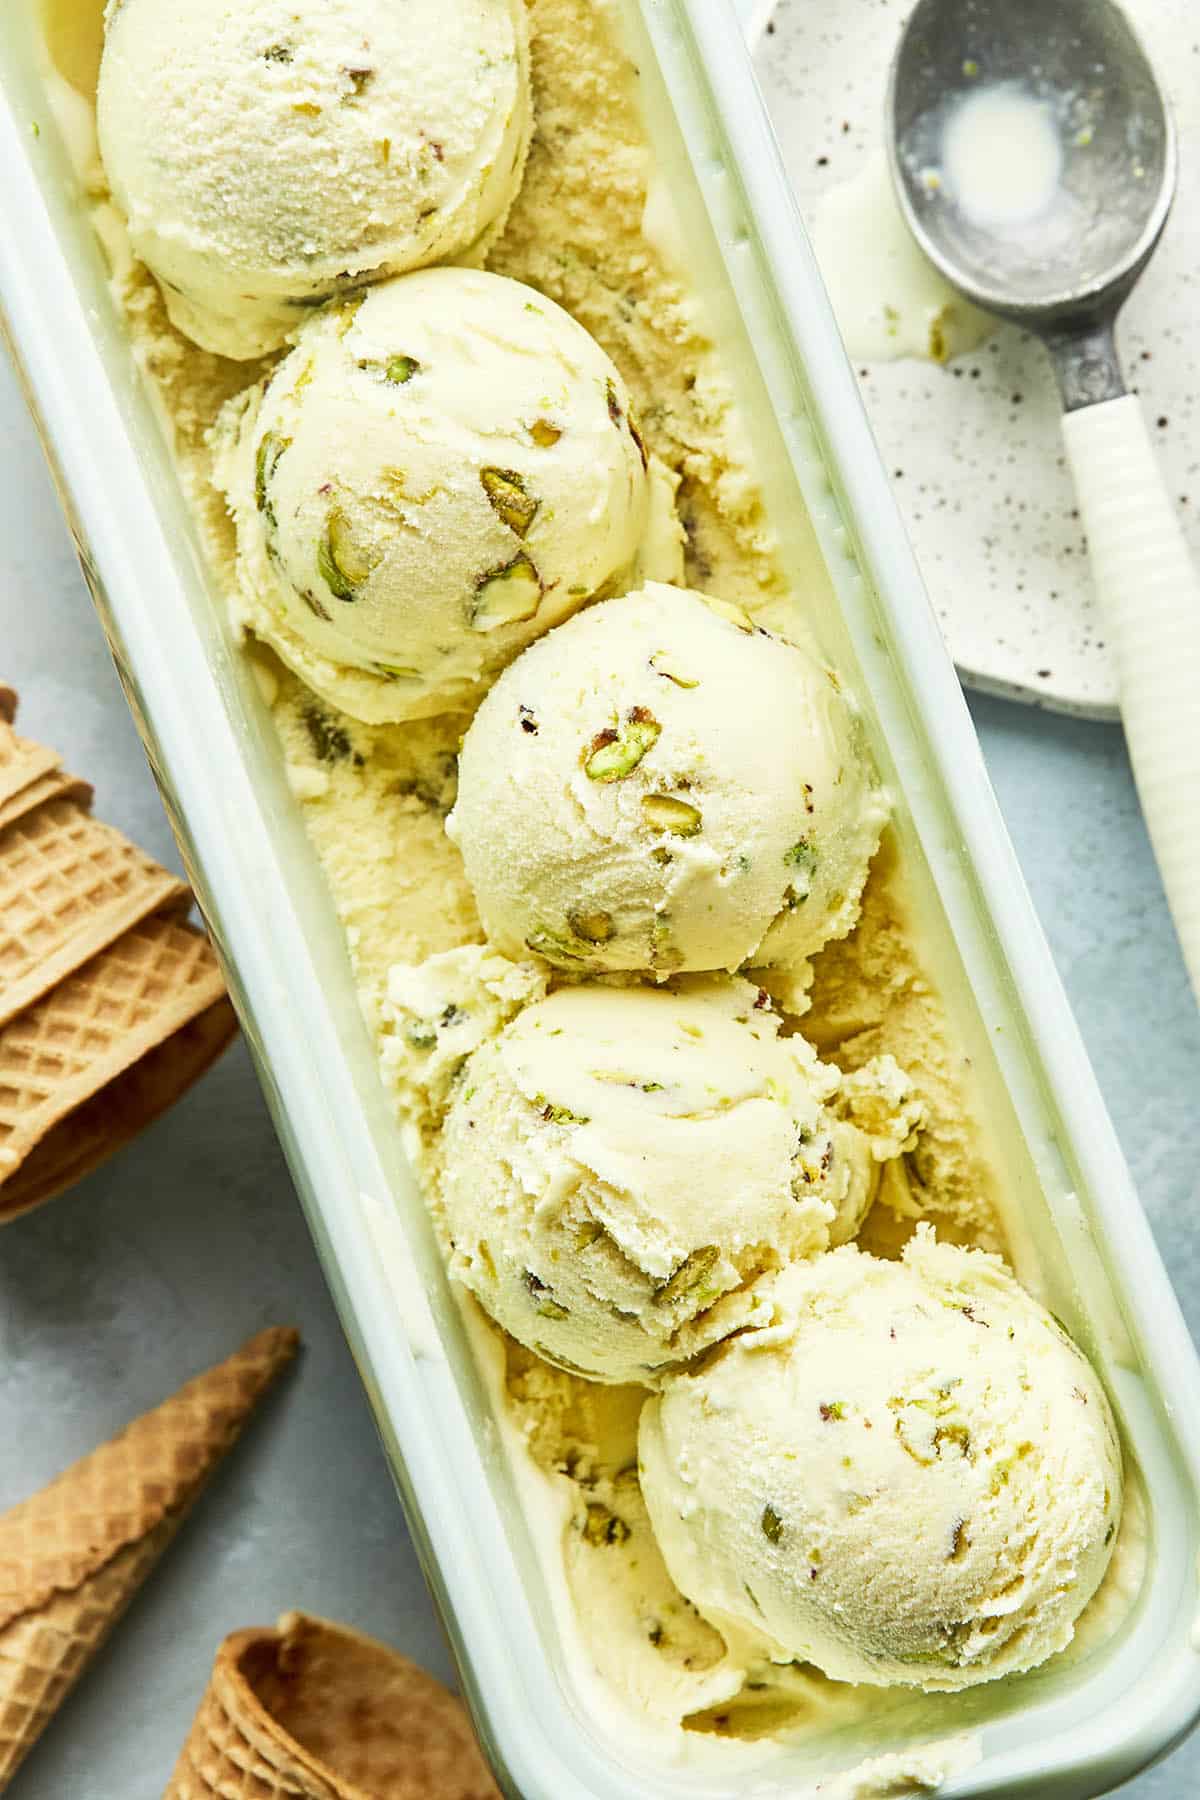 A tub of homemade pistachio ice cream with five scoops of the ice cream sitting on top.